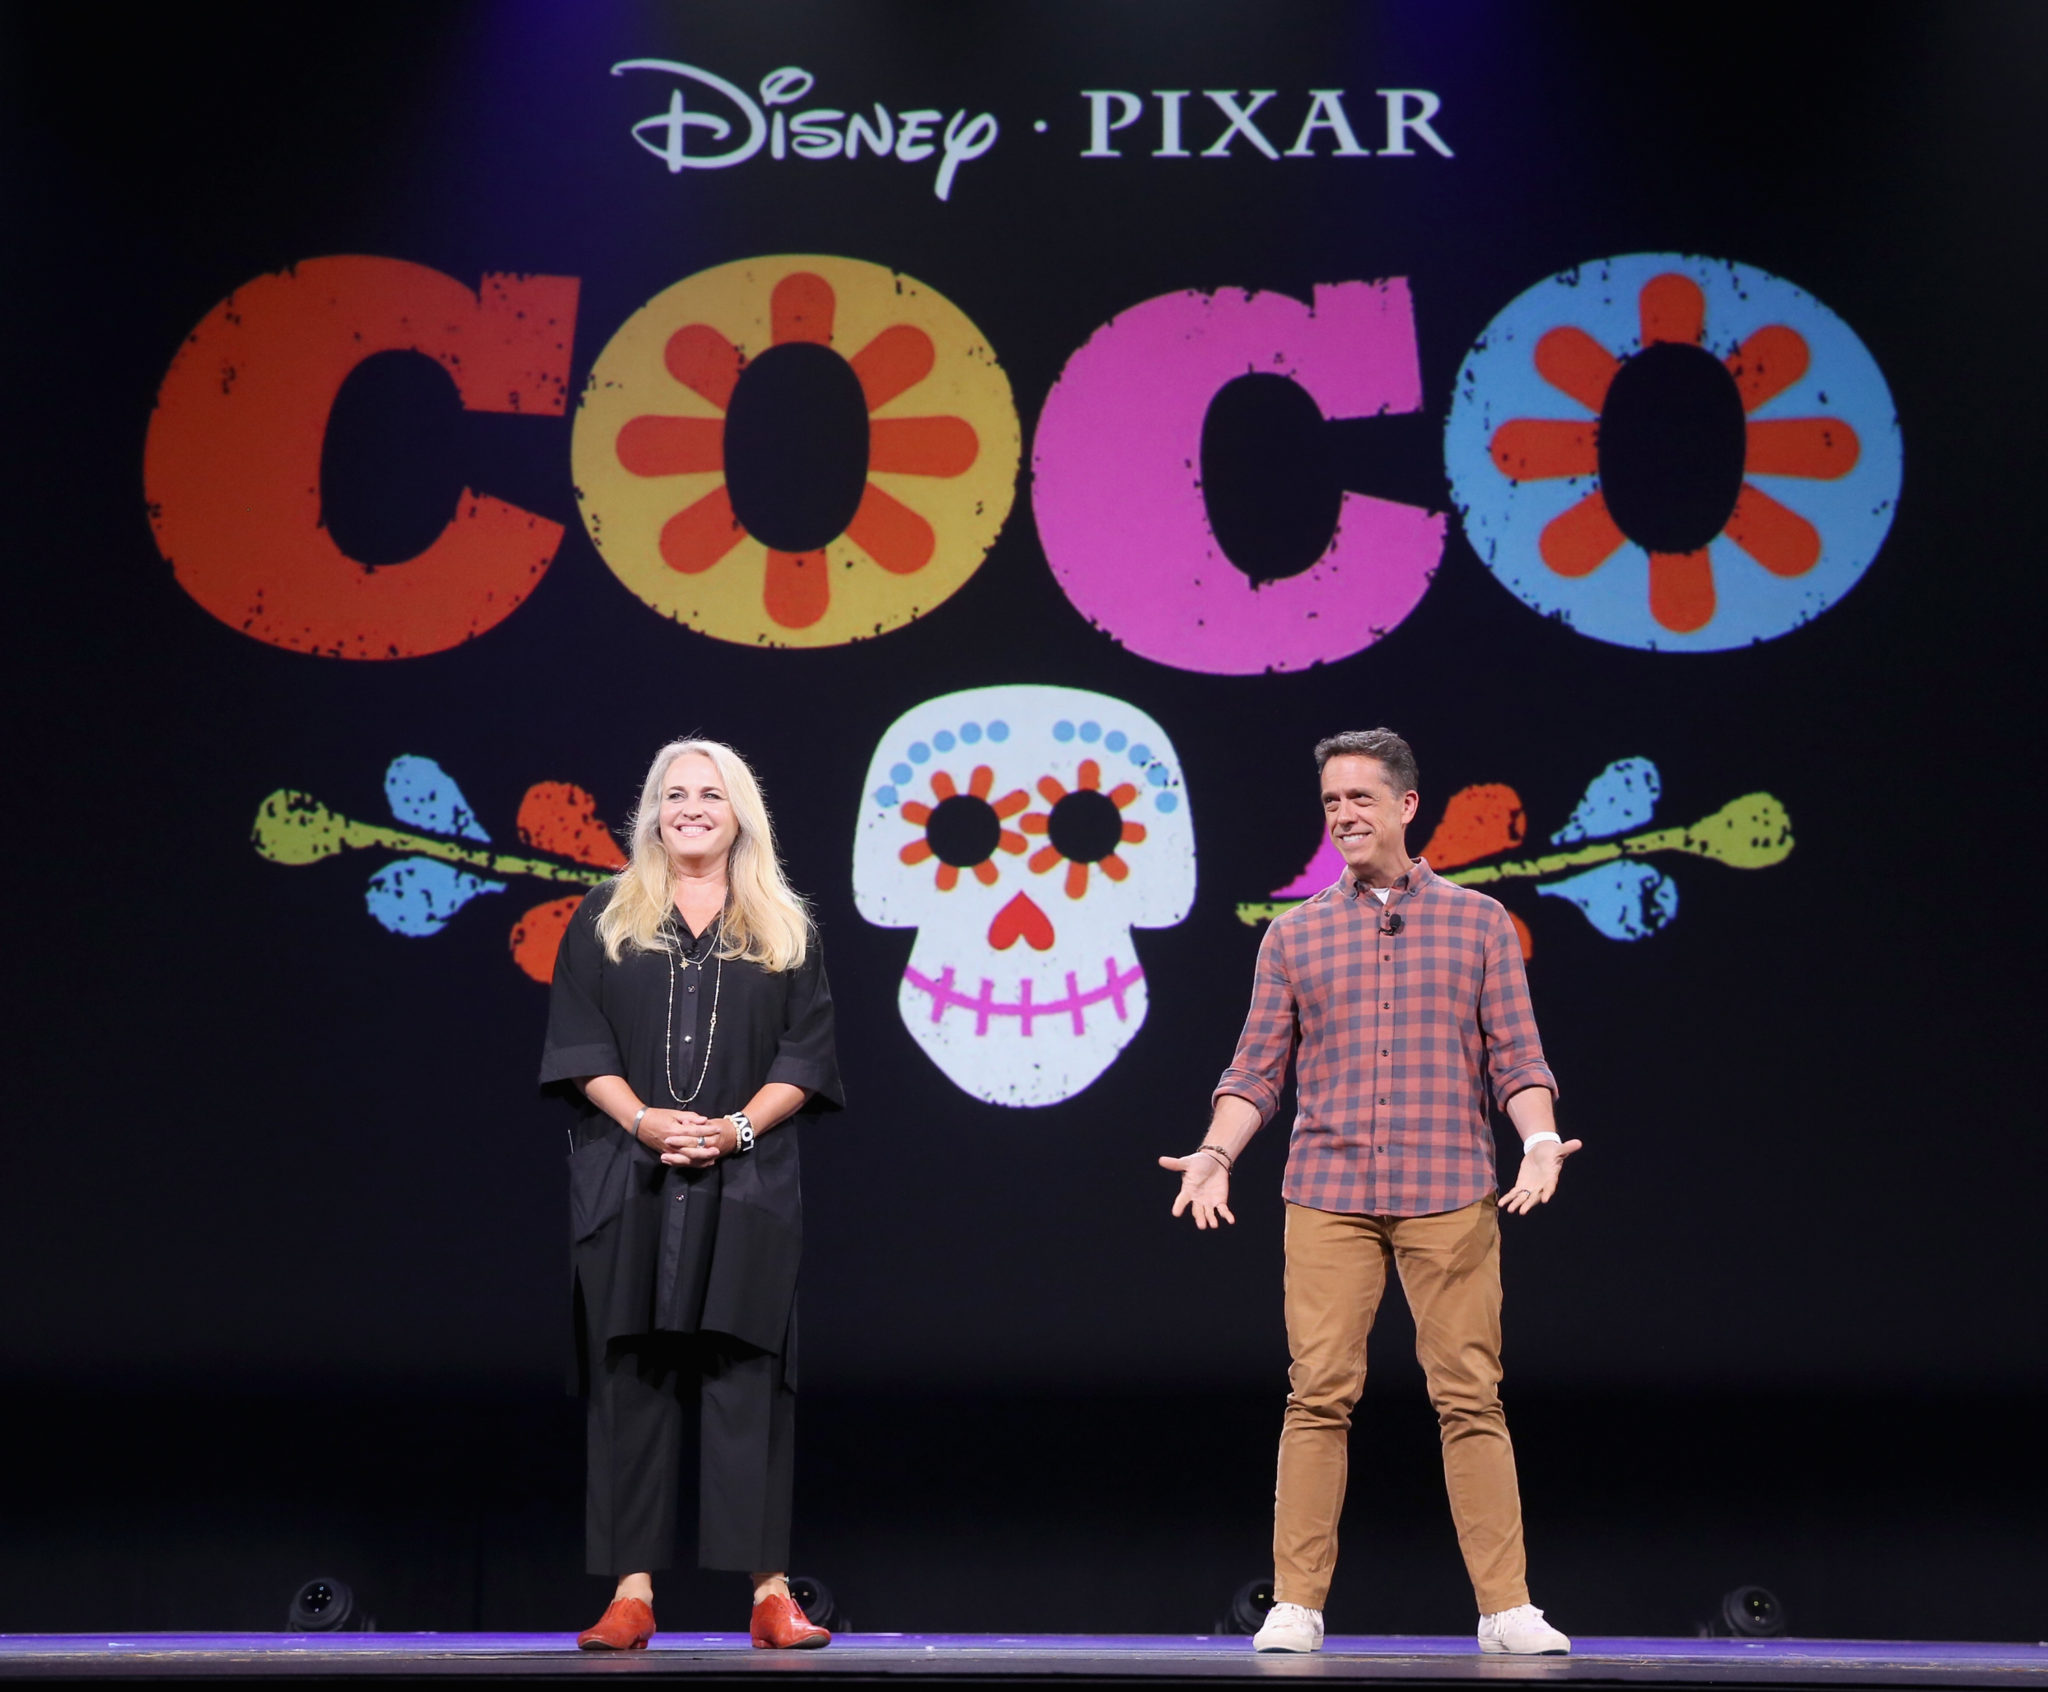 ANAHEIM, CA - AUGUST 14: Producer Darla K. Anderson (L) and director Lee Unkrich of COCO took part today in "Pixar and Walt Disney Animation Studios: The Upcoming Films" presentation at Disney's D23 EXPO 2015 in Anaheim, Calif. (Photo by Jesse Grant/Getty Images for Disney) *** Local Caption *** Lee Unkrich; Darla K. Anderson